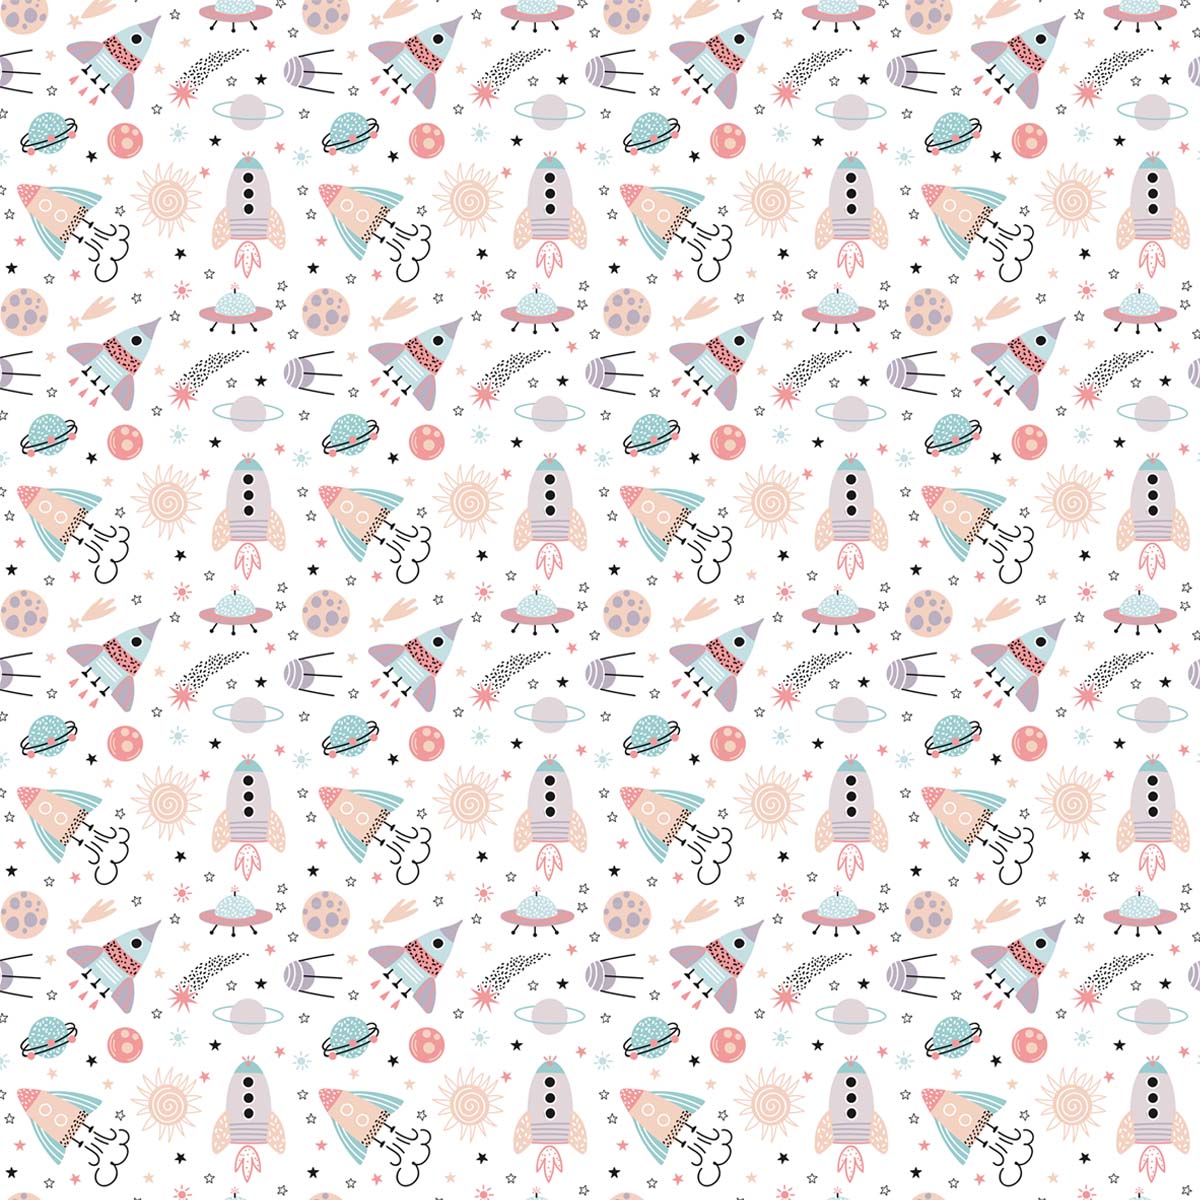 A pattern of cartoon rockets and planets